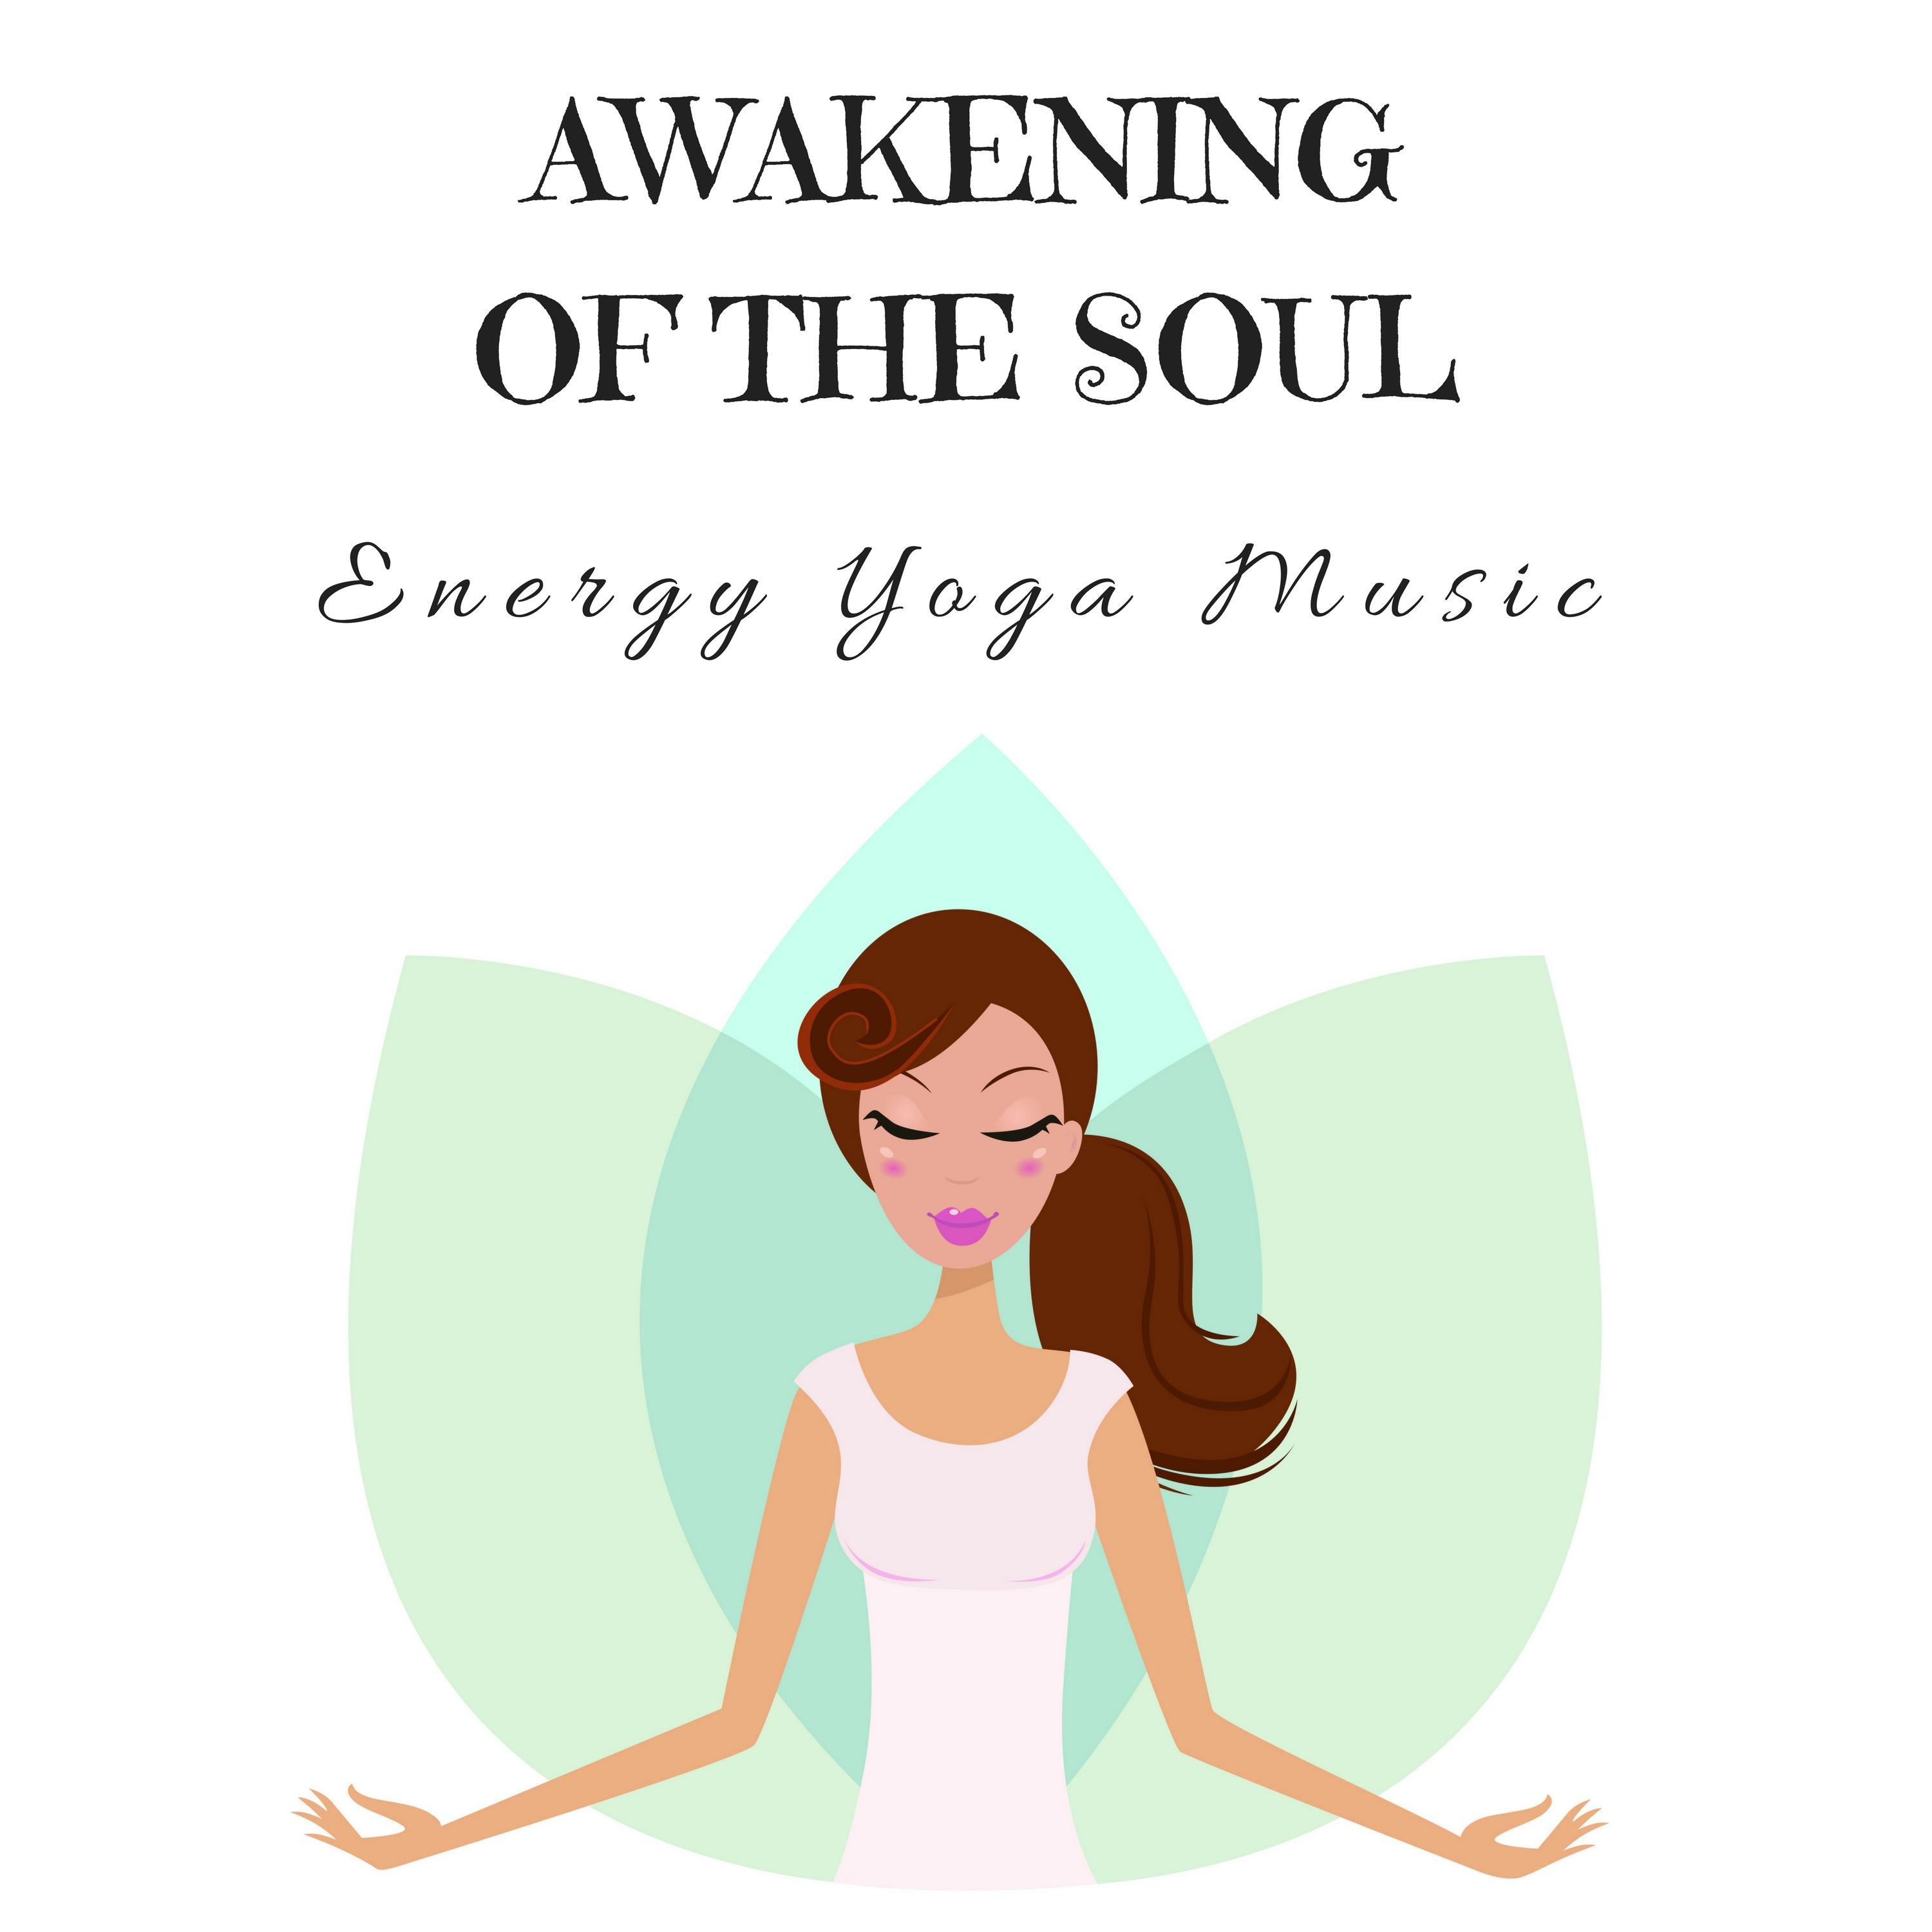 Awakening of the Soul: Energy Yoga Music for Yoga Class, Sounds of Nature Charming Tracks